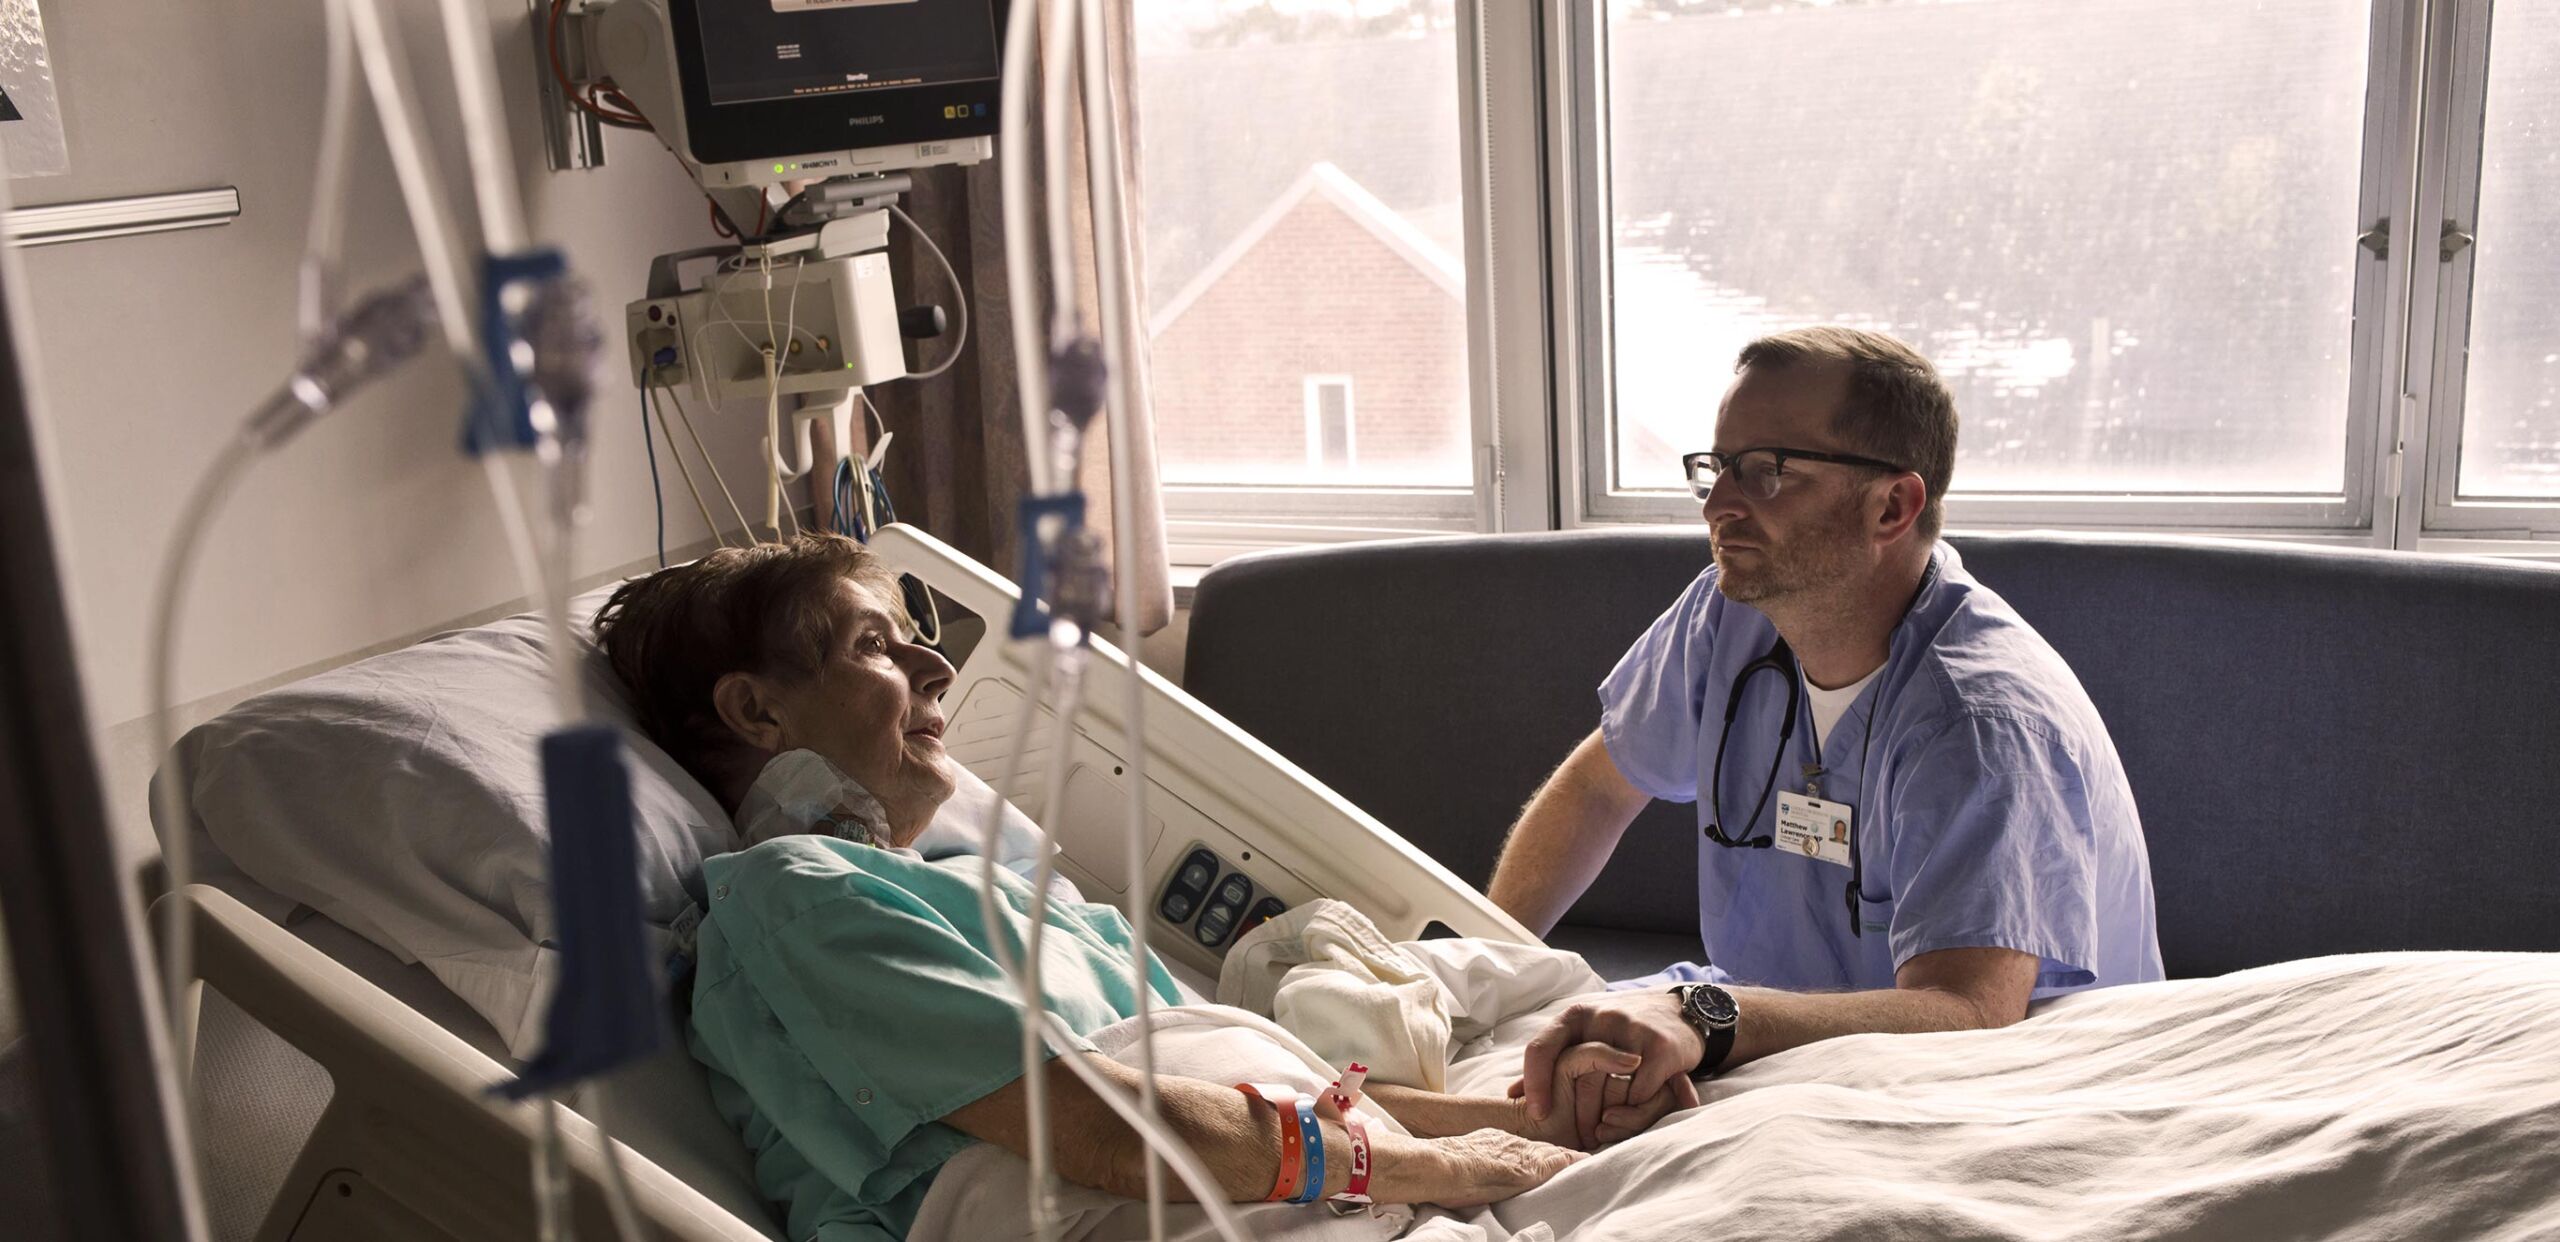 Critical care specialist Andrew Levinson, MD, talks with a patient in the Critical Care Unit at Cooley Dickinson Hospital, Northampton, MA 01060.